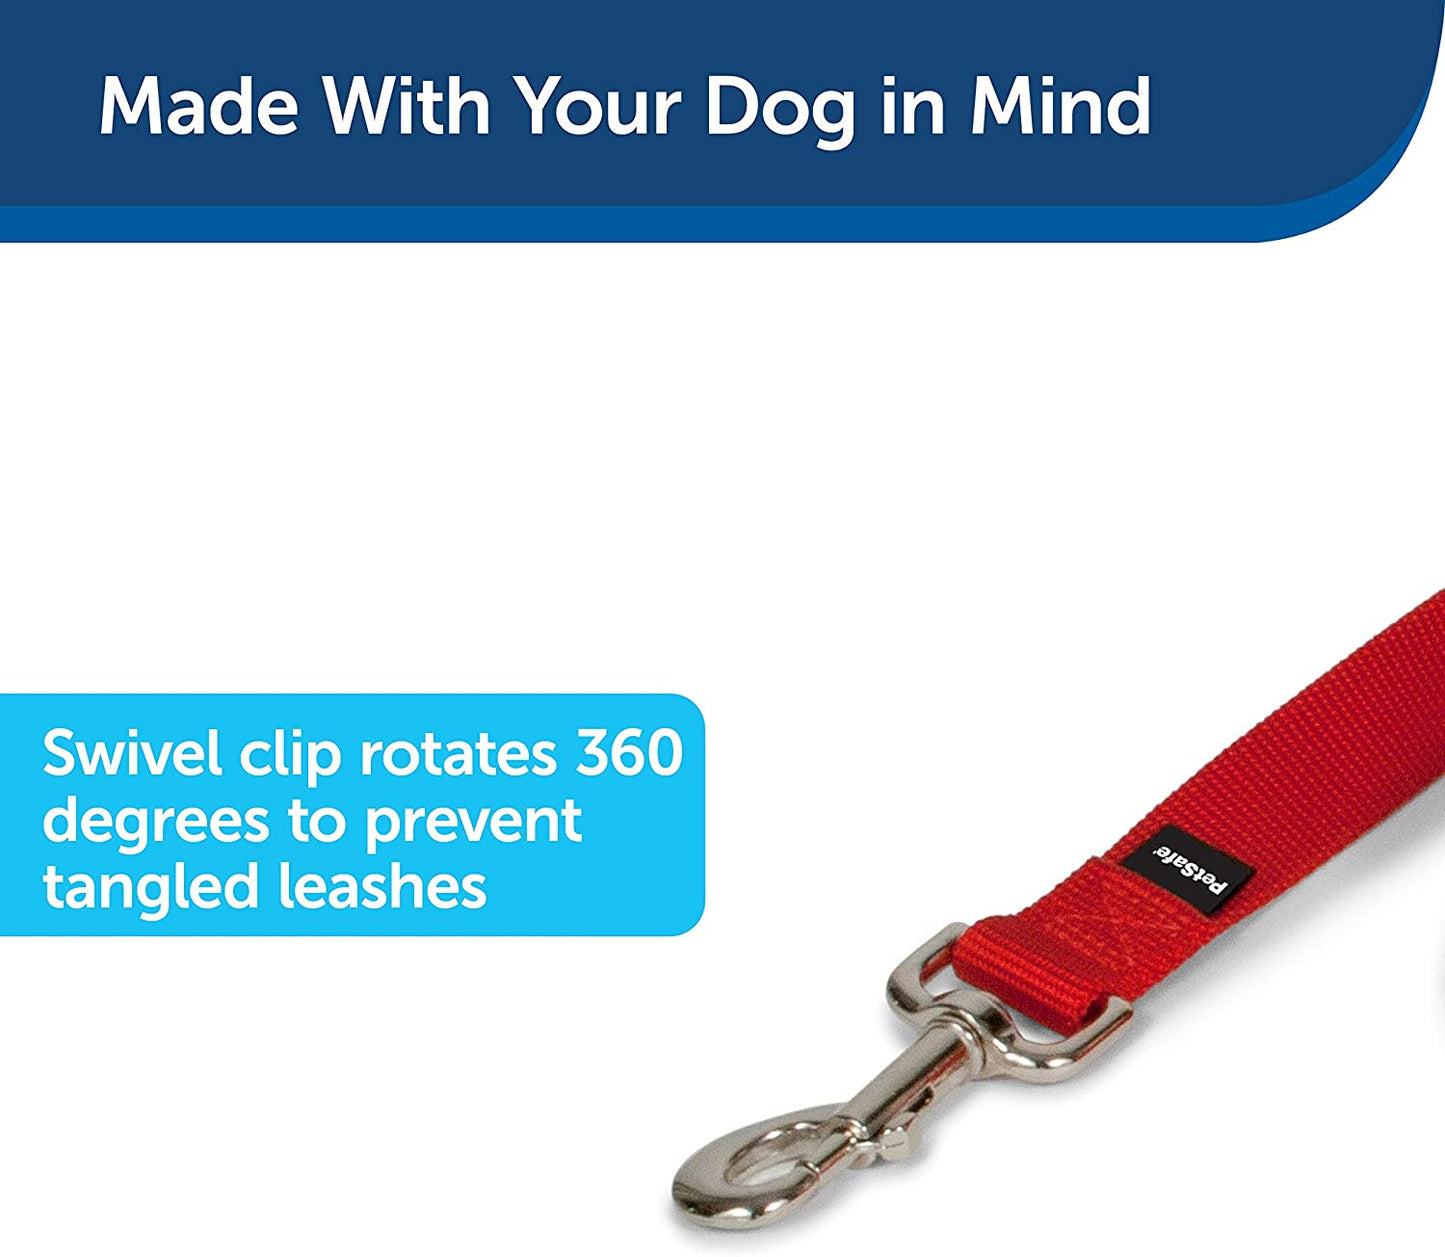 PetSafe Nylon - Traditional Style Leash/ RED